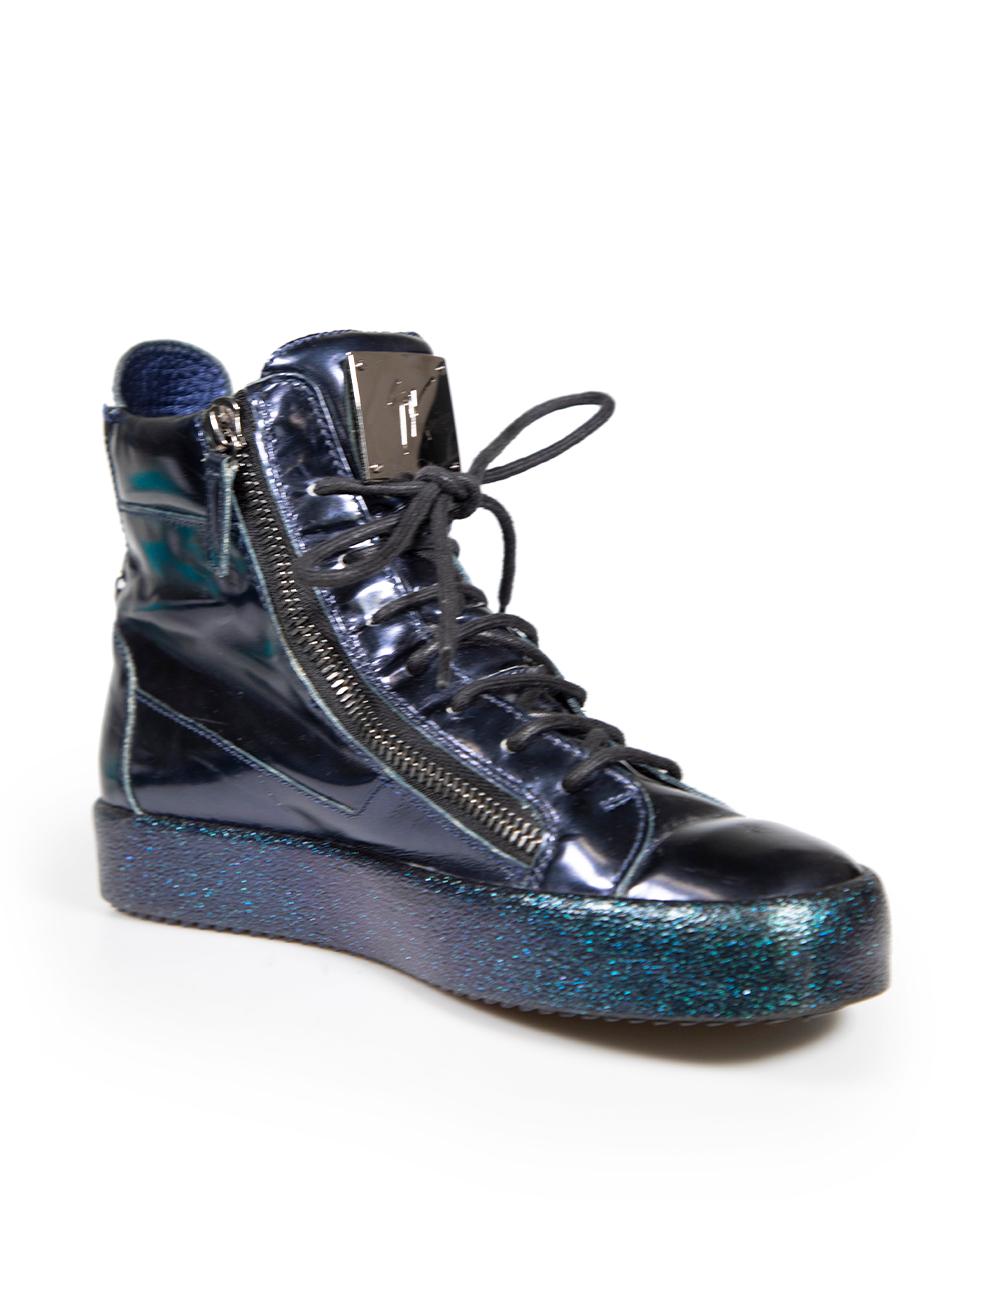 CONDITION is Very good. Minimal wear to trainers is evident. Abrasions and scratches to the patent leather on this used Giuseppe Zanotti designer resale item.
 
 
 
 Details
 
 
 Navy
 
 Patent leather
 
 High top trainers
 
 Round toe
 
 Flatform